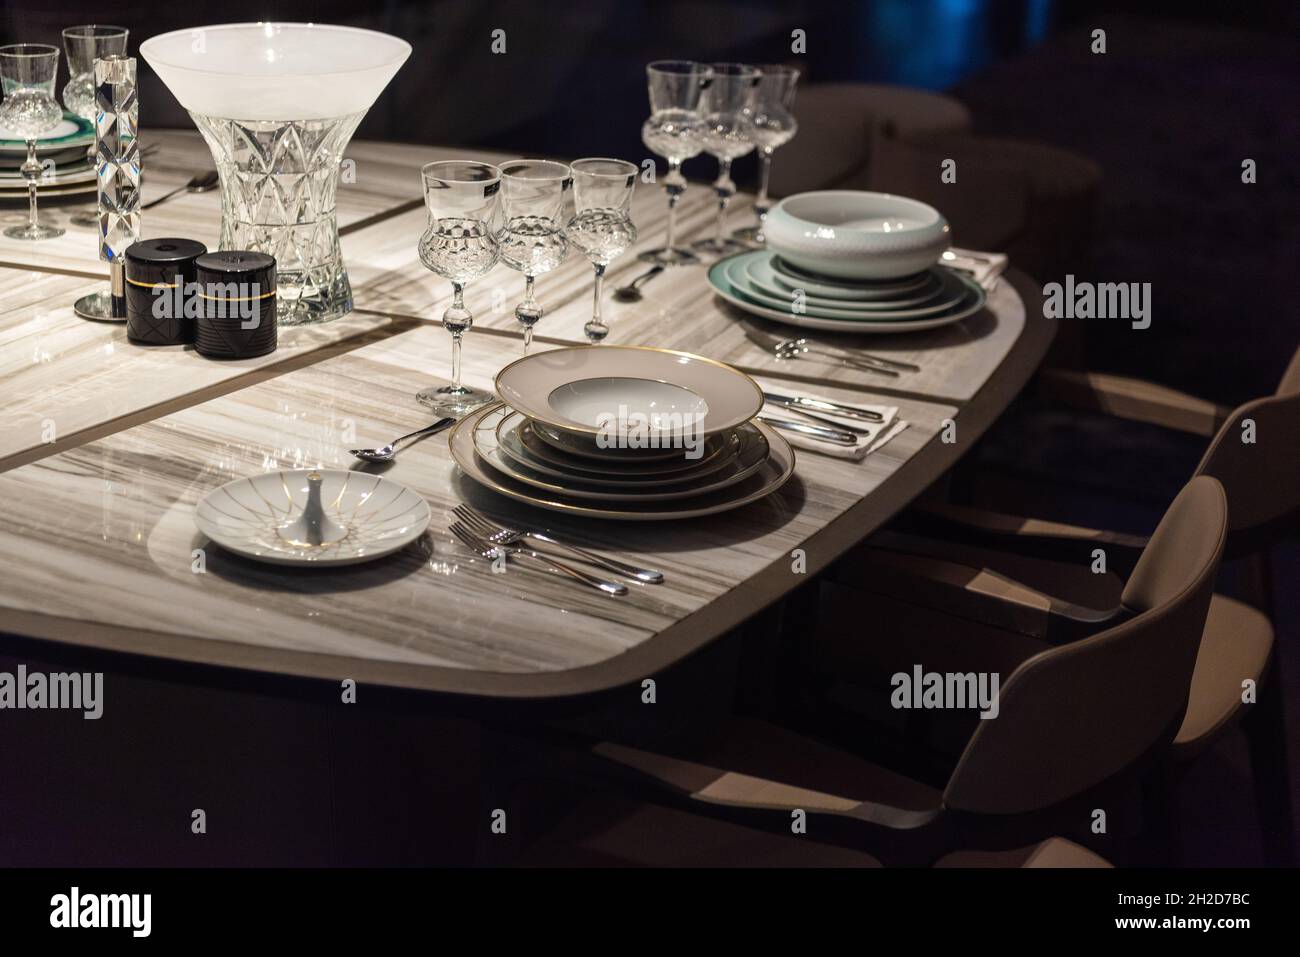 Luxury Table Setting with Crystal Glass and Expensive Tableware Stock ...